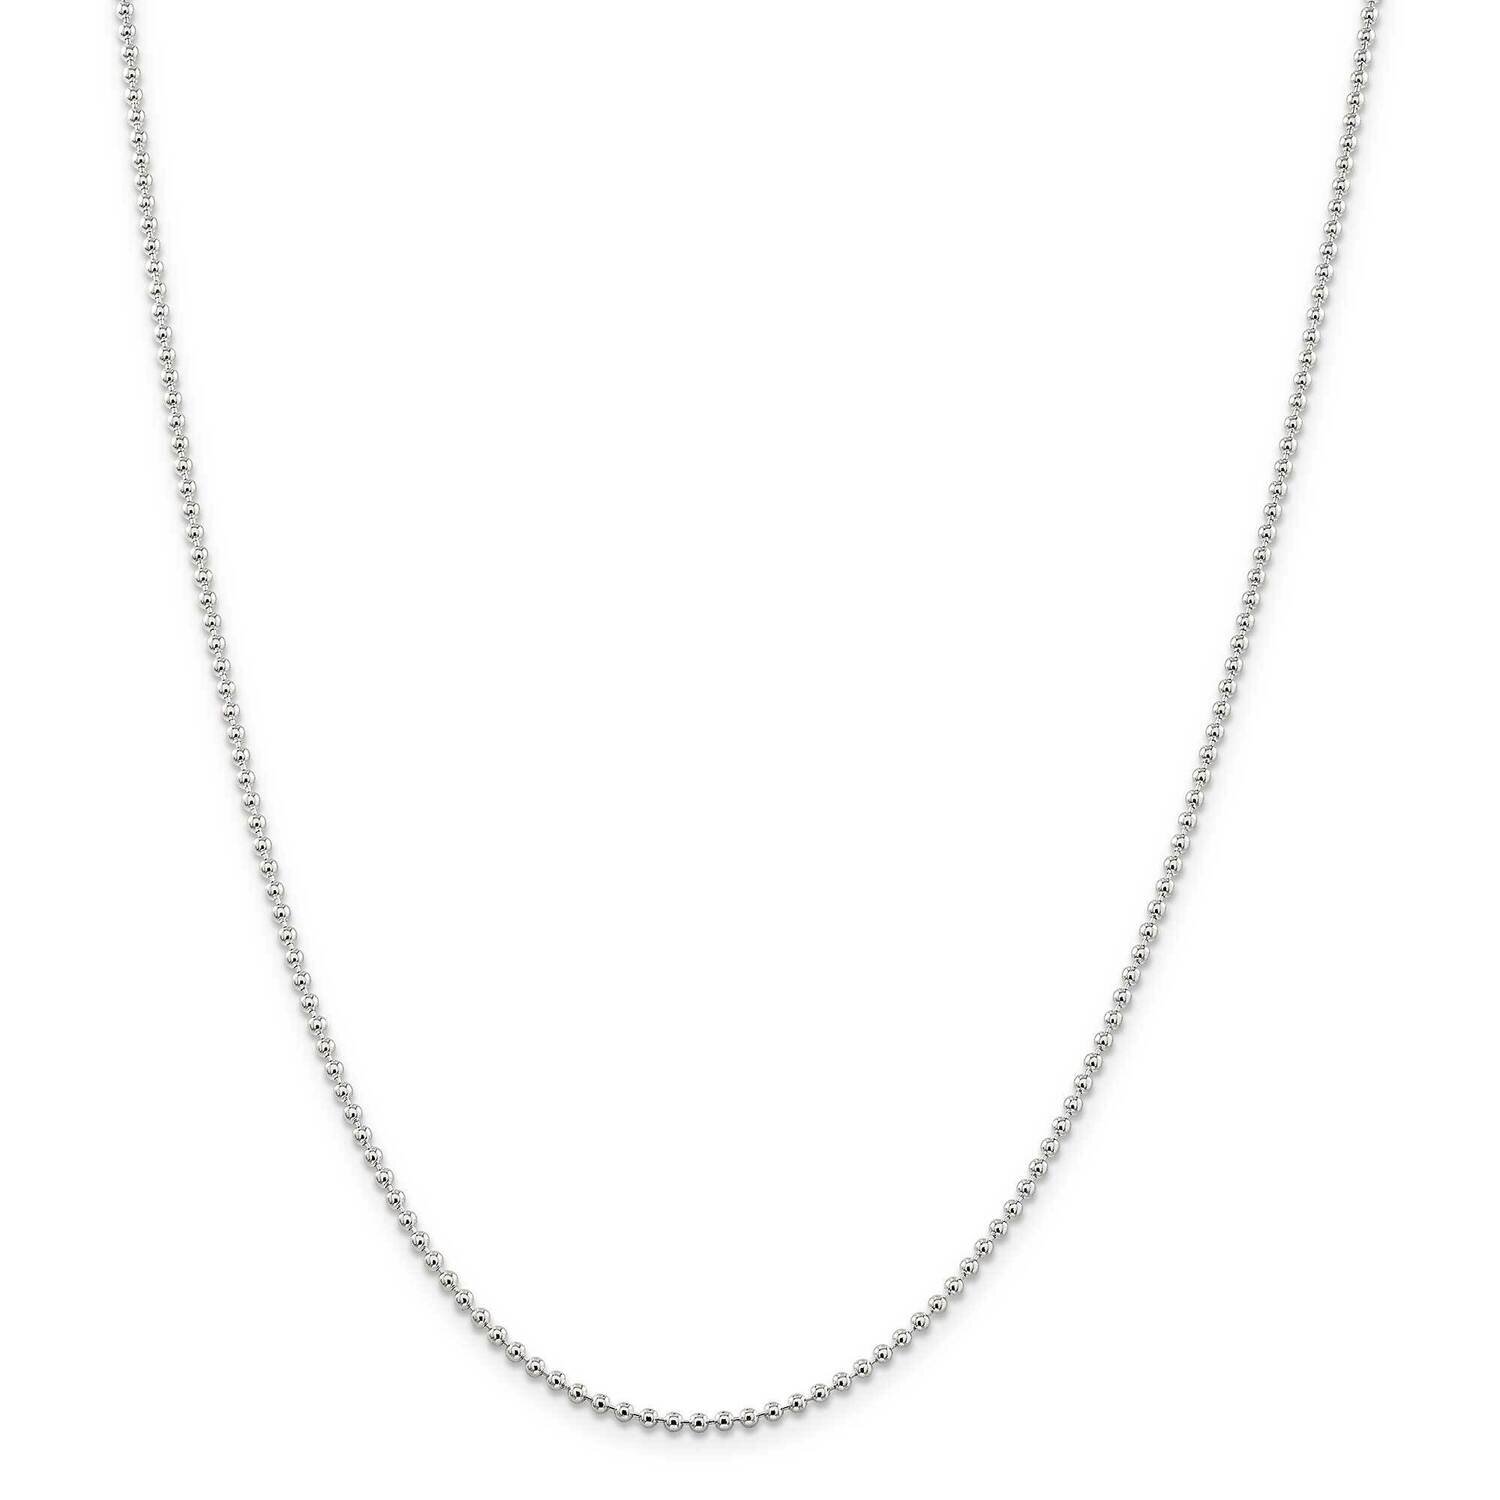 2mm Beaded Chain 30 Inch Sterling Silver QK27-30